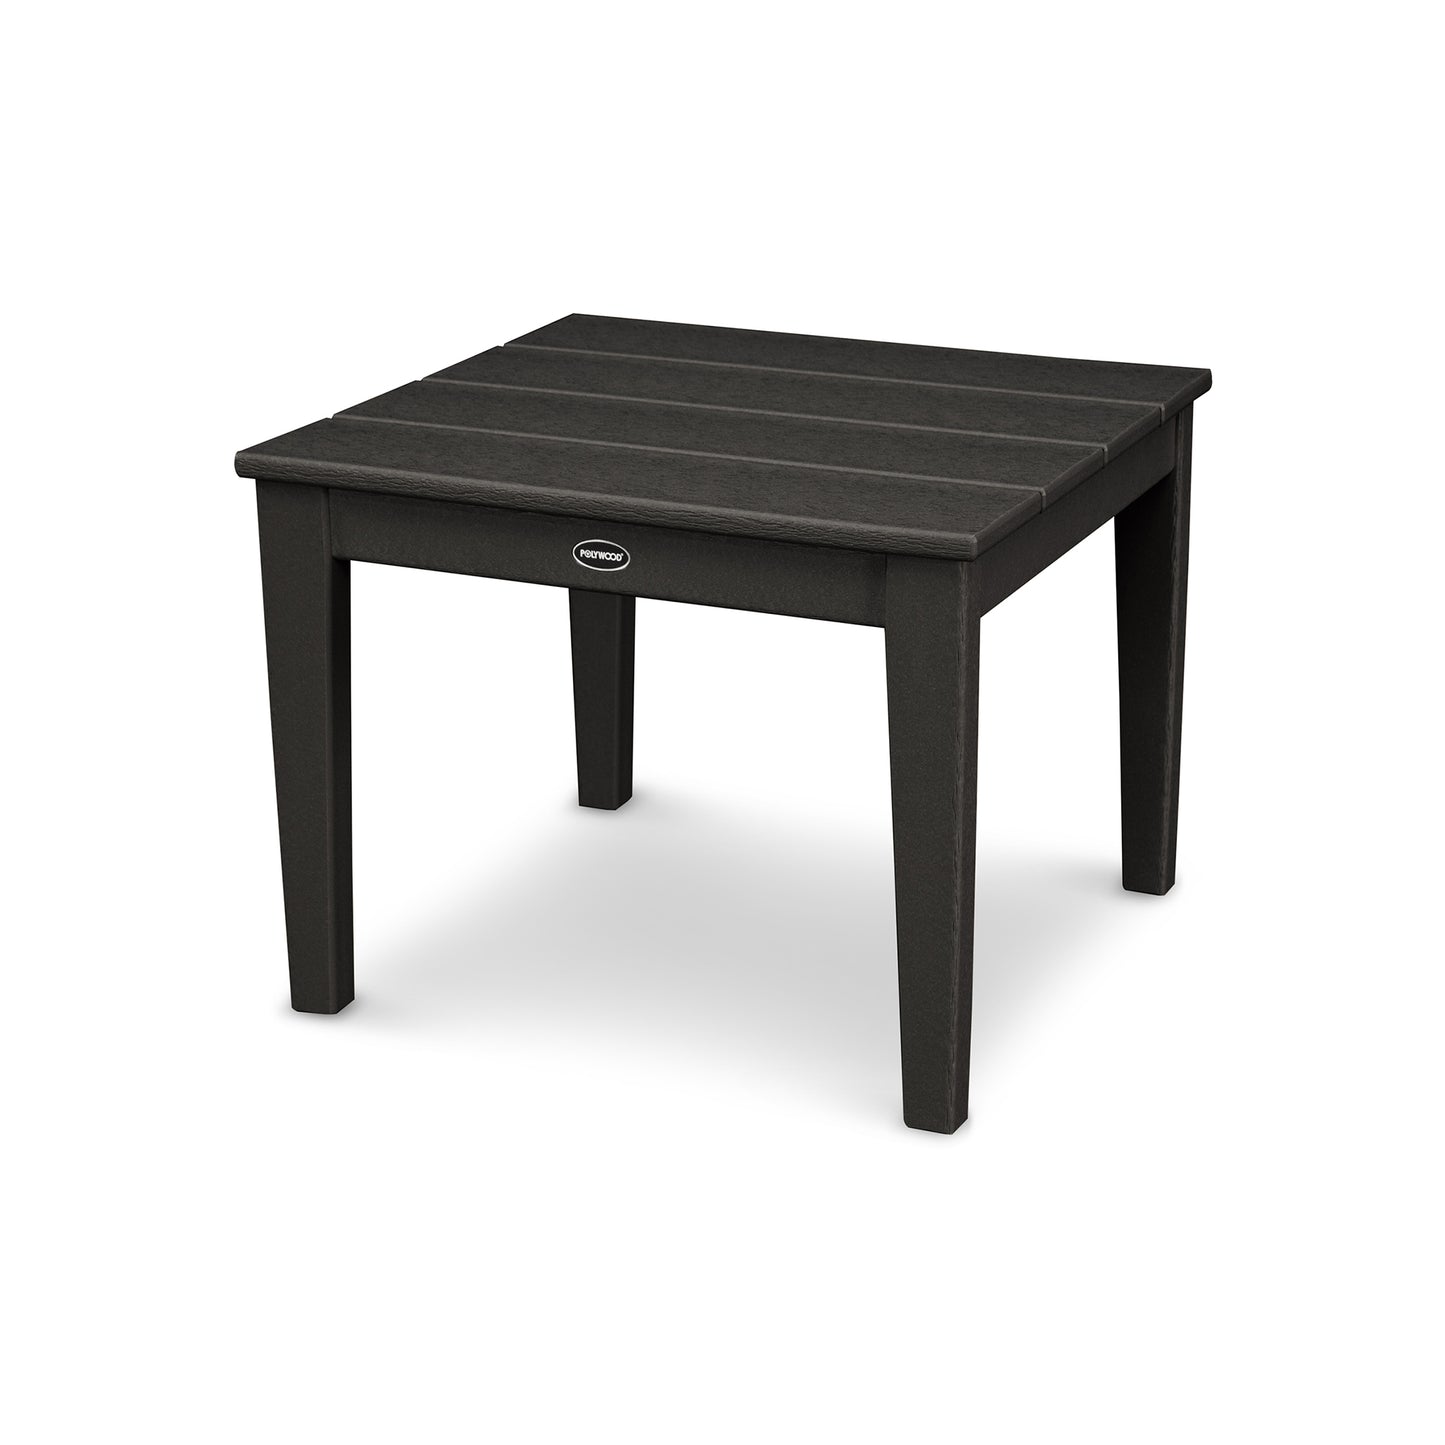 A dark gray POLYWOOD Newport 22" end table with a slatted top design and four sturdy legs, isolated on a white background.